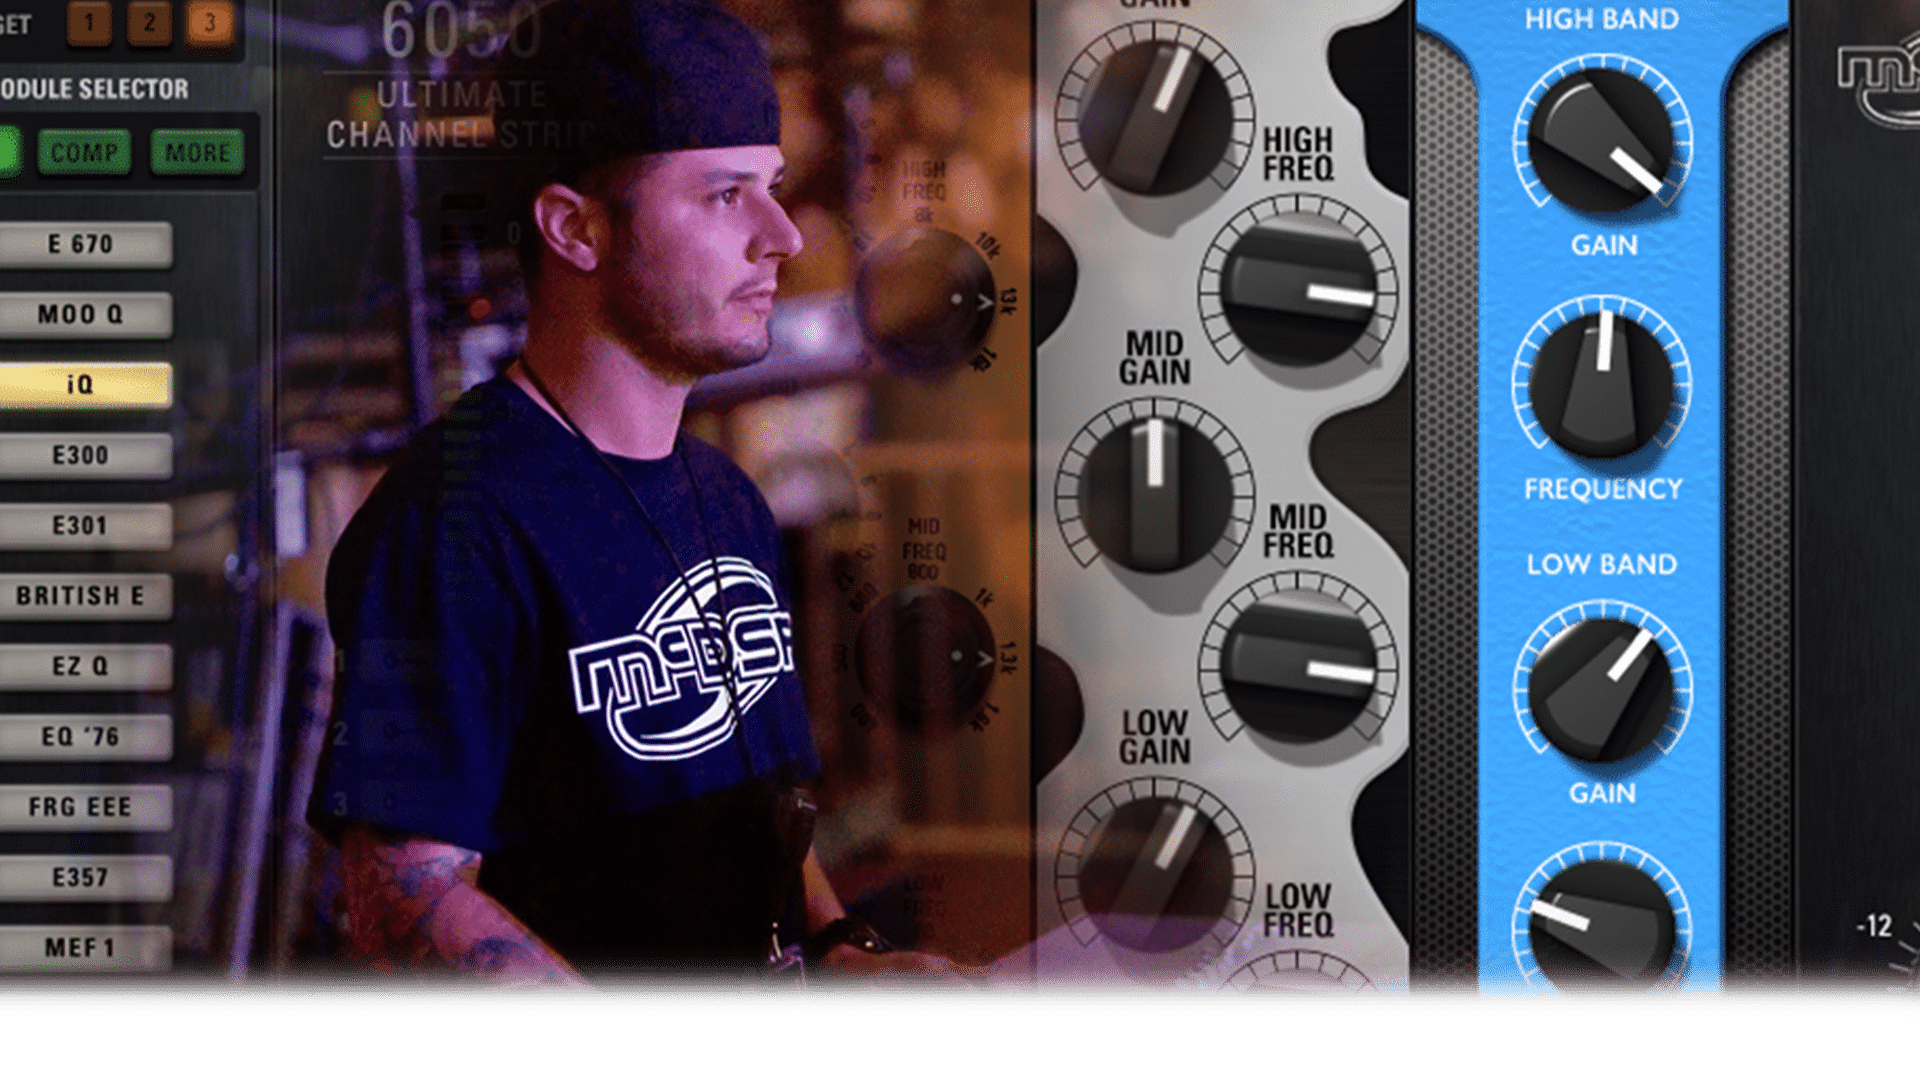 6050 Ultimate Channel Strip Native v7 by McDSP